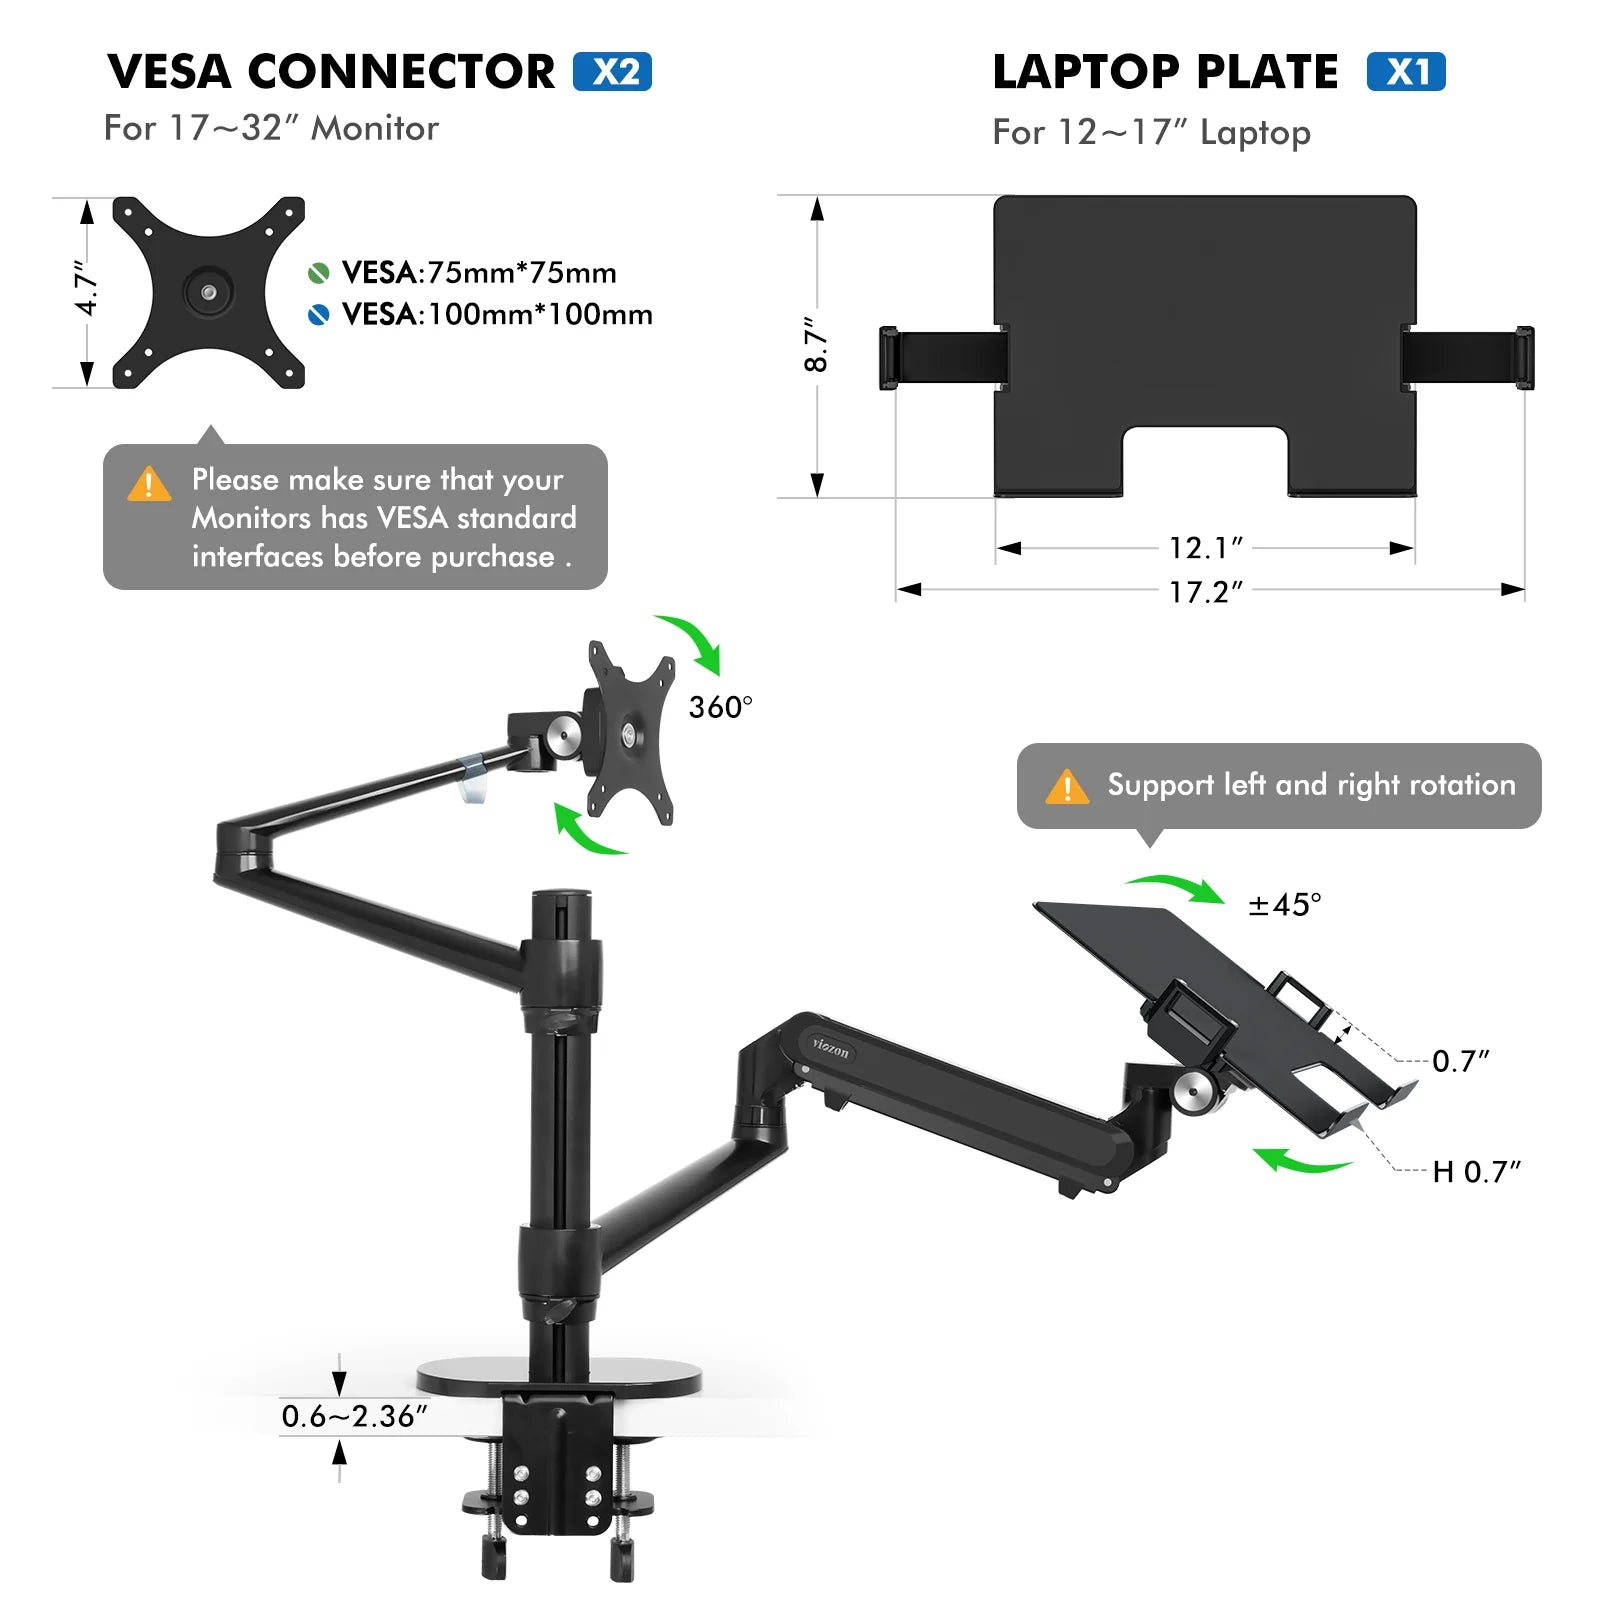 Single Monitor Arm with Gas Spring and Laptop Stand Desk Mount Bracket Black